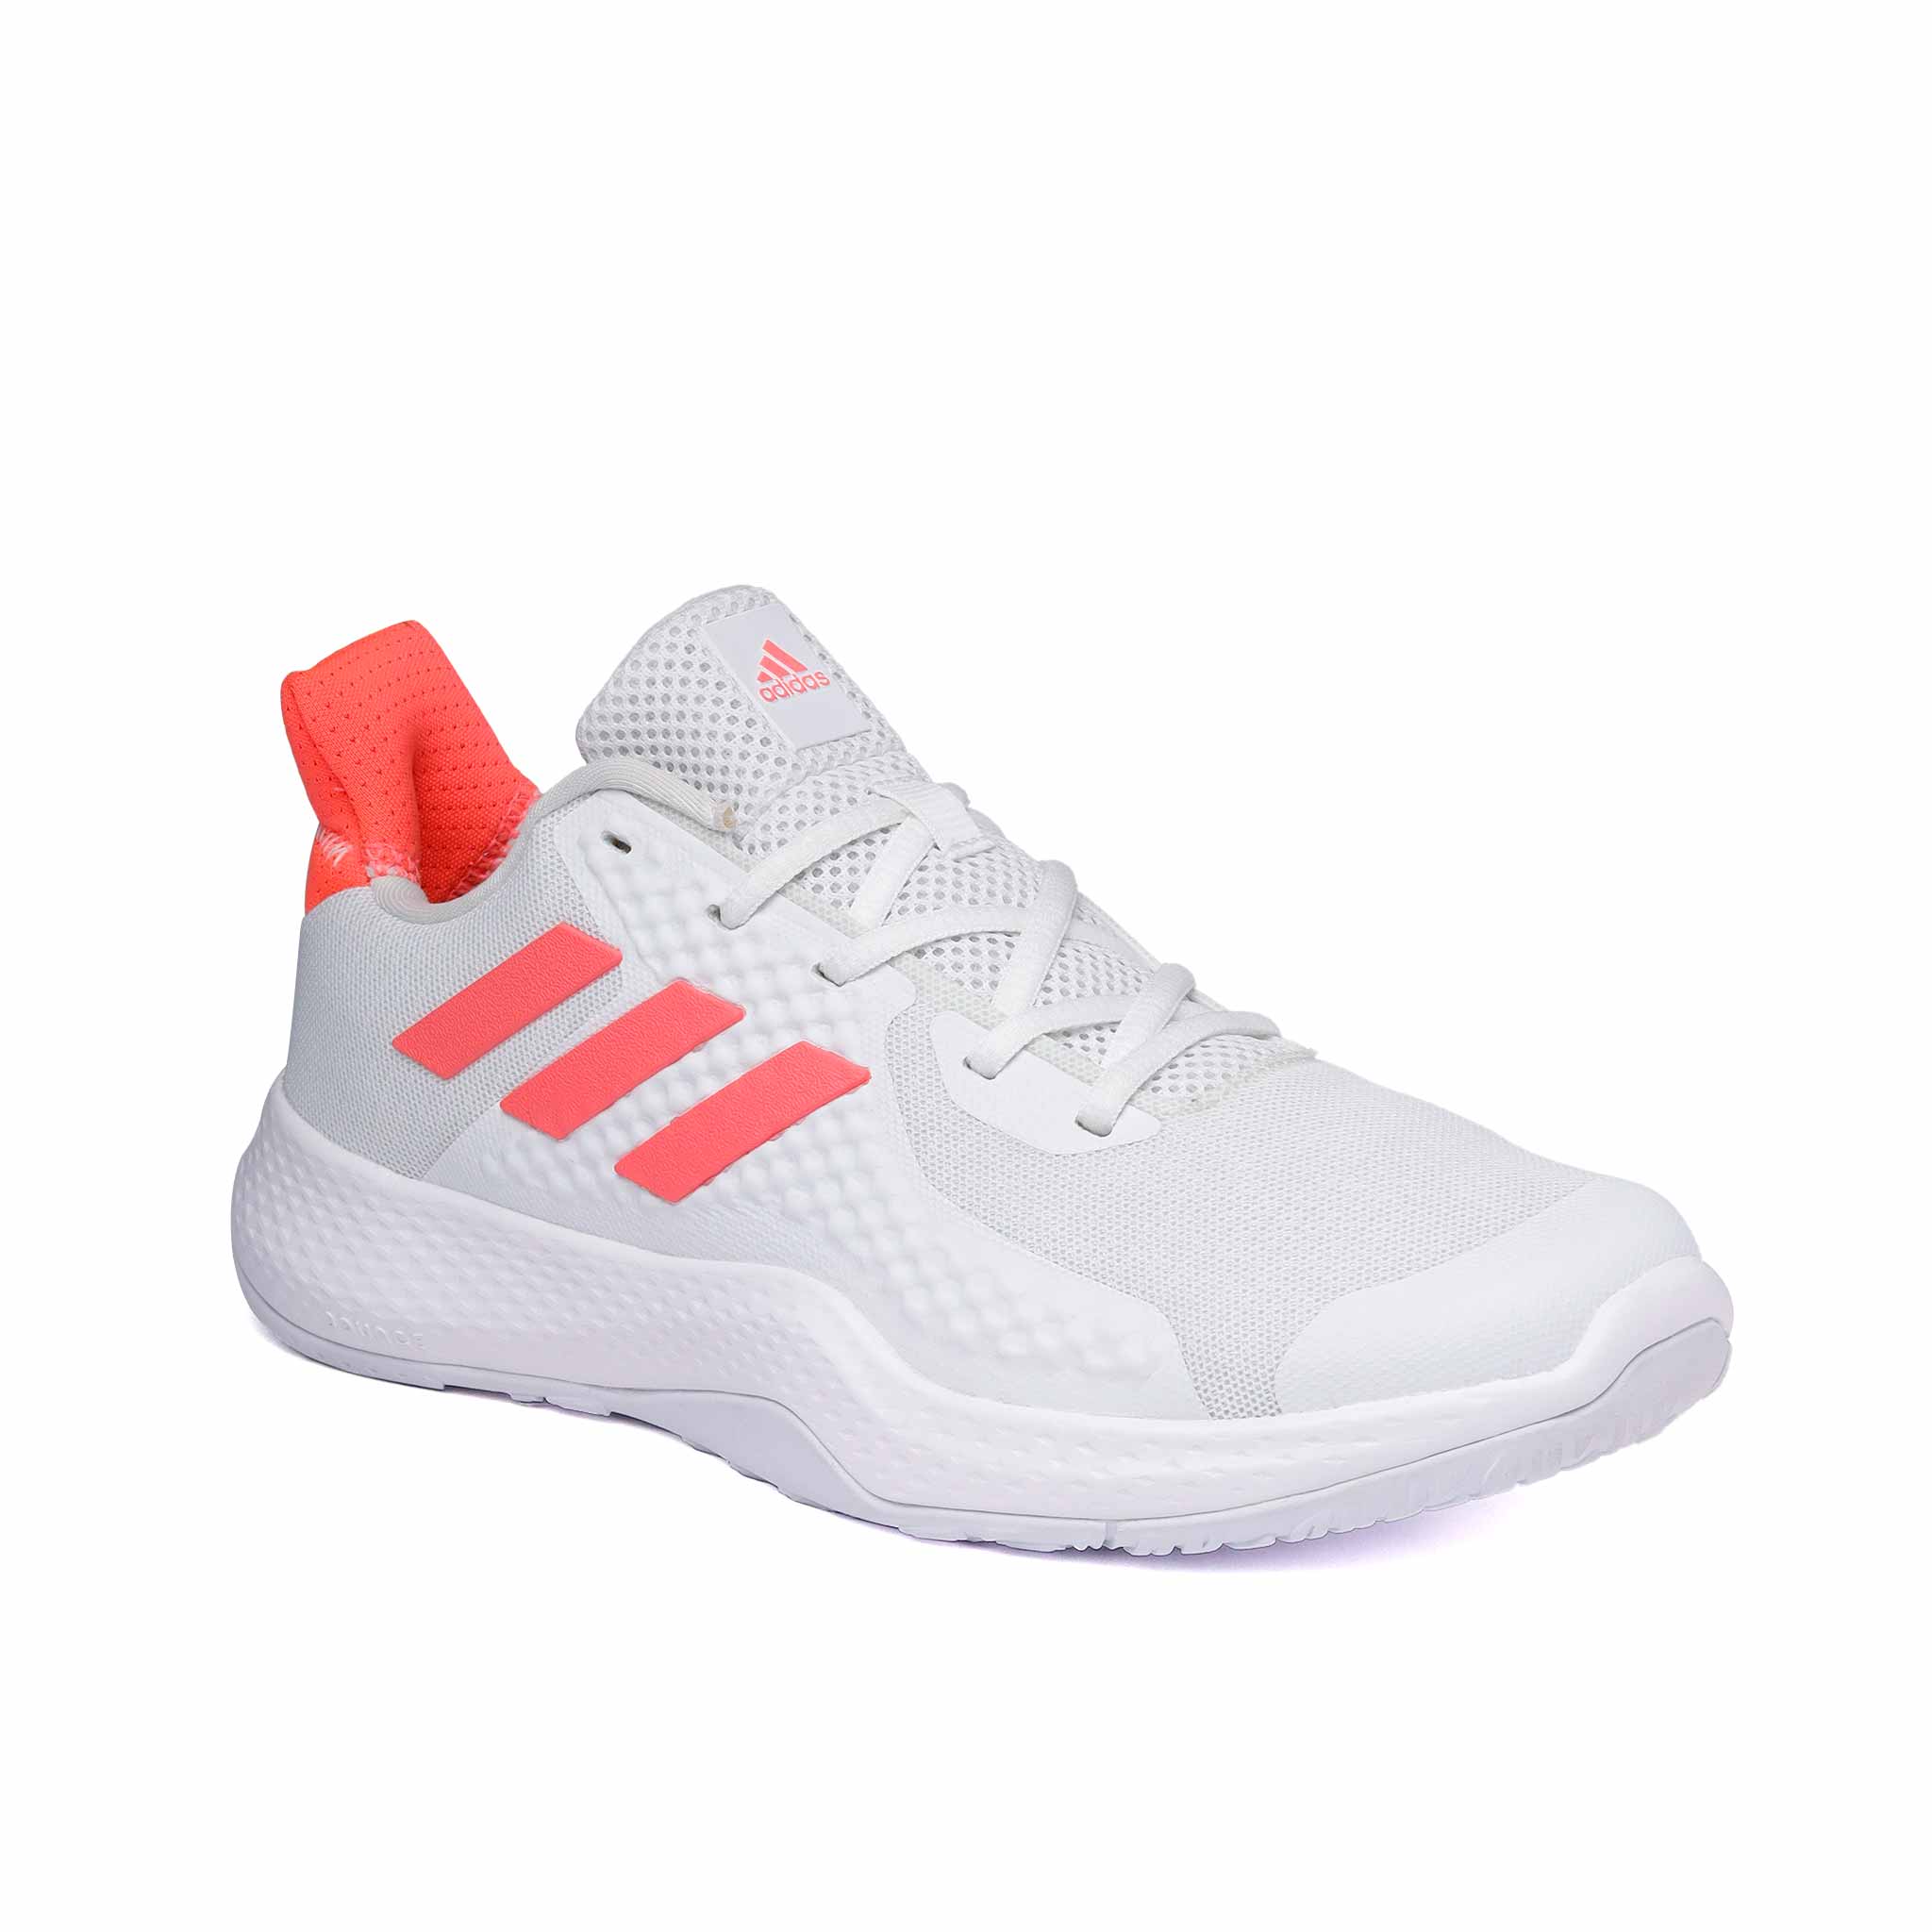 Tenis Adidas FitBounce